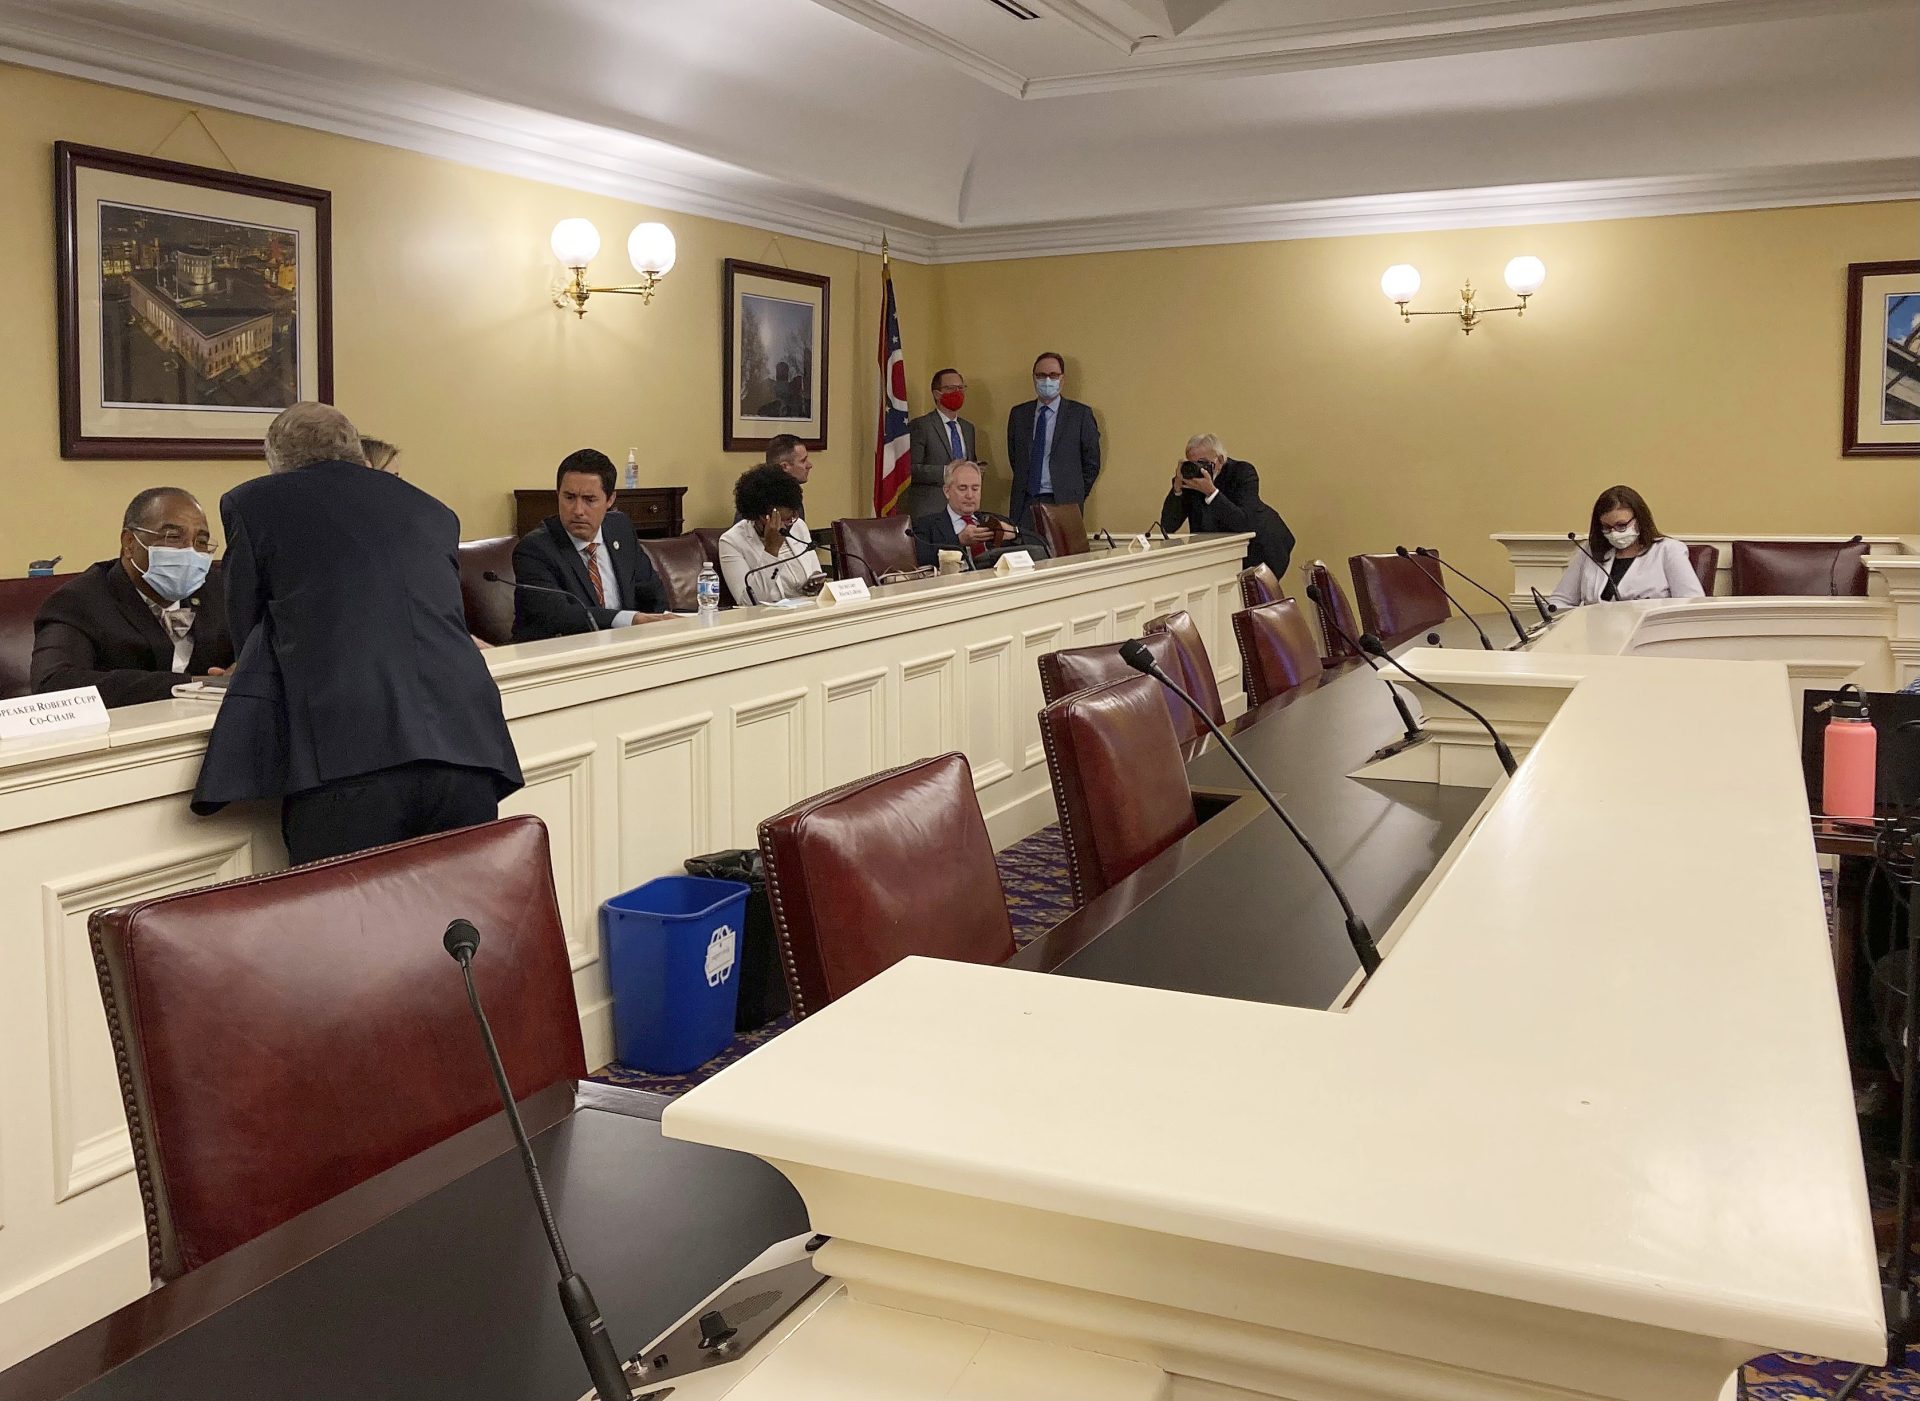 In this Sept. 15, 2021, photo, Republican Ohio Gov. Mike DeWine, foreground, speaks to state Sen. Vernon Sykes, seated, the co-chair of the Ohio Redistricting Commission, as other members of the panel prepare for a meeting on at the Ohio Statehouse in Columbus, Ohio.